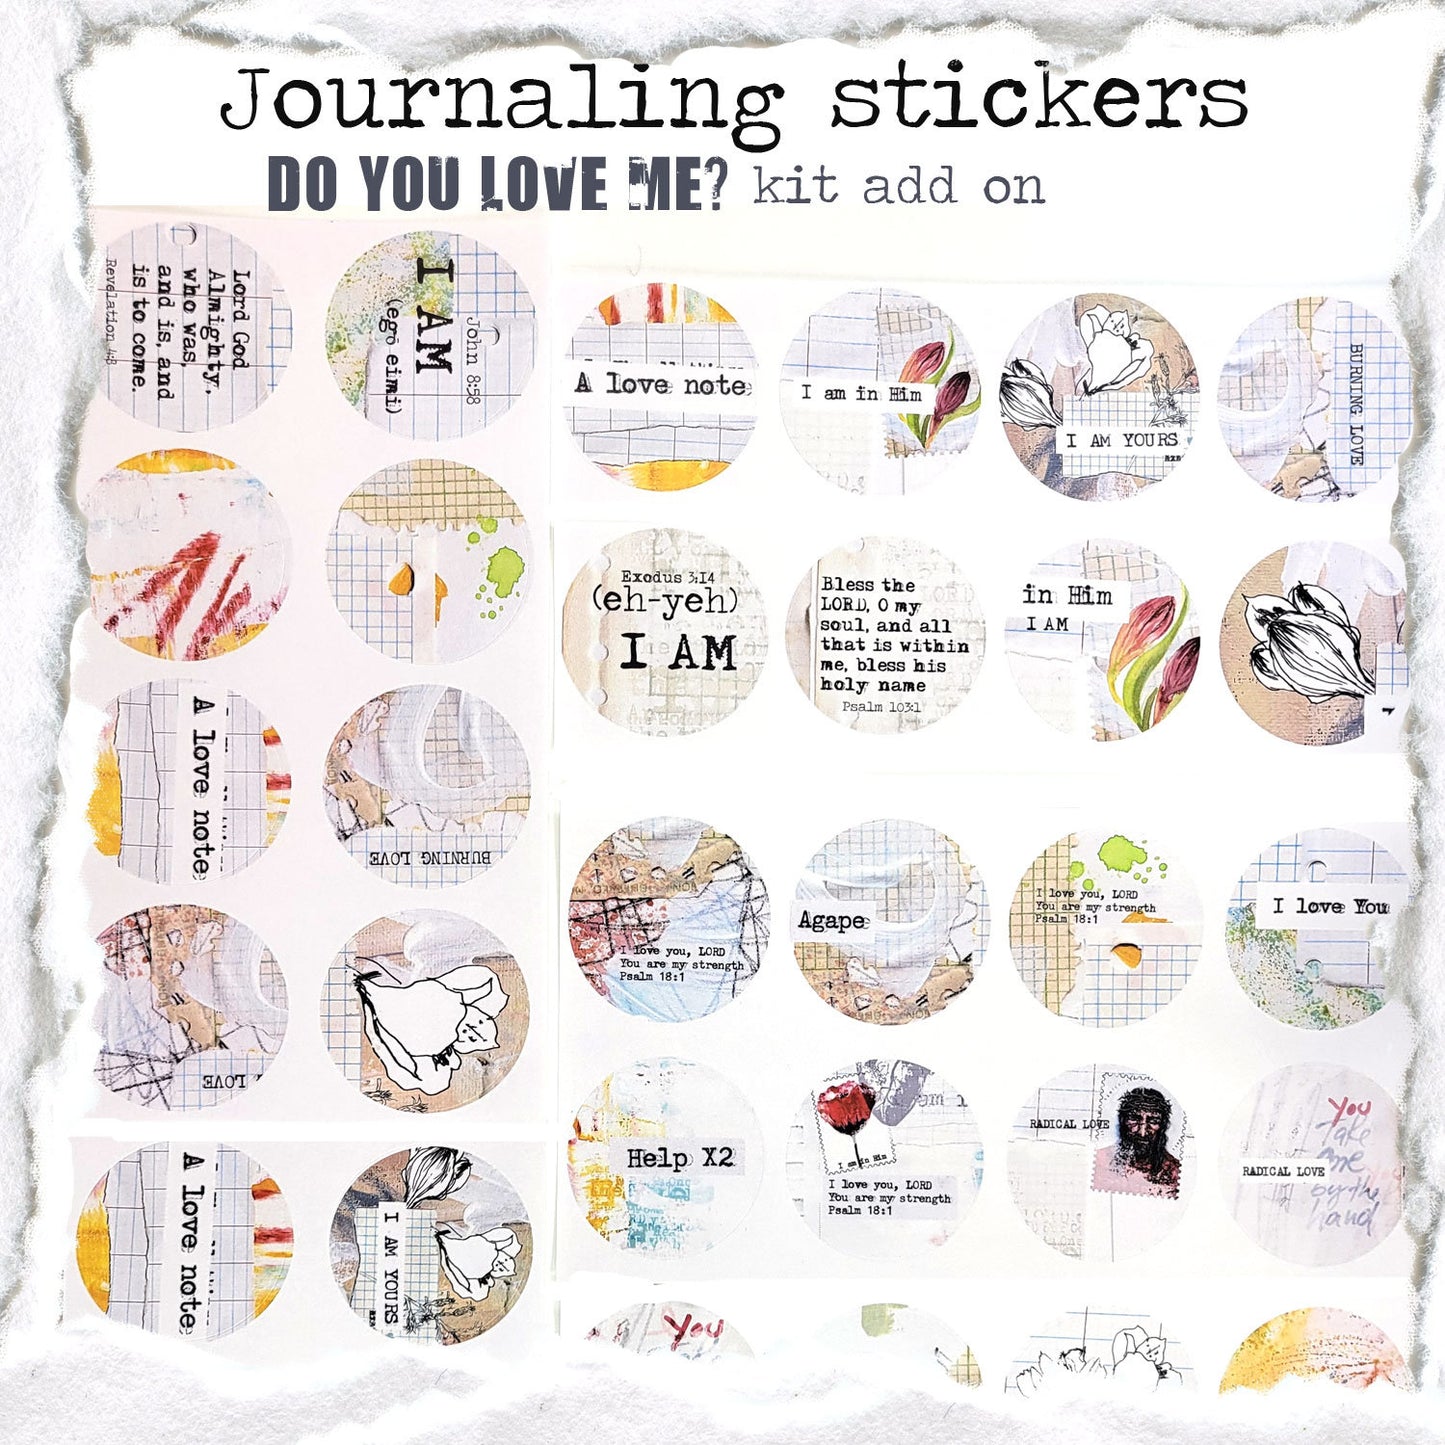 Do you love Me?- ADD ON 40 journaling circular stickers